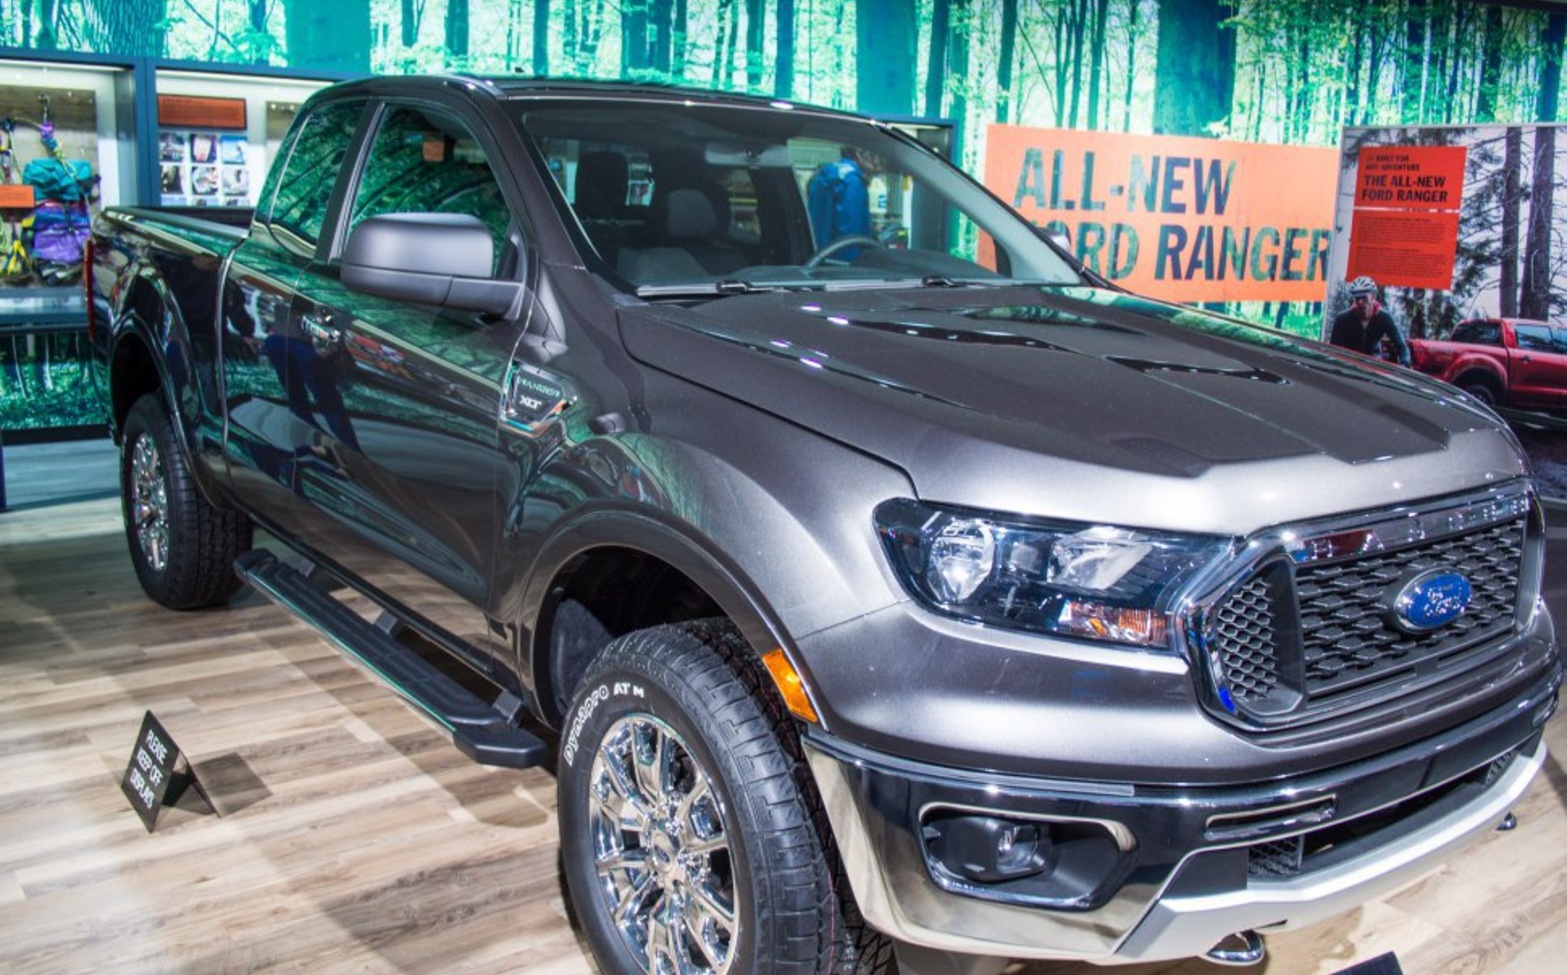 Ford Ranger IV SuperCab (Americas) 2.3 EcoBoost (270 Hp) 4x4 Automatic 2019, 2020, 2021 